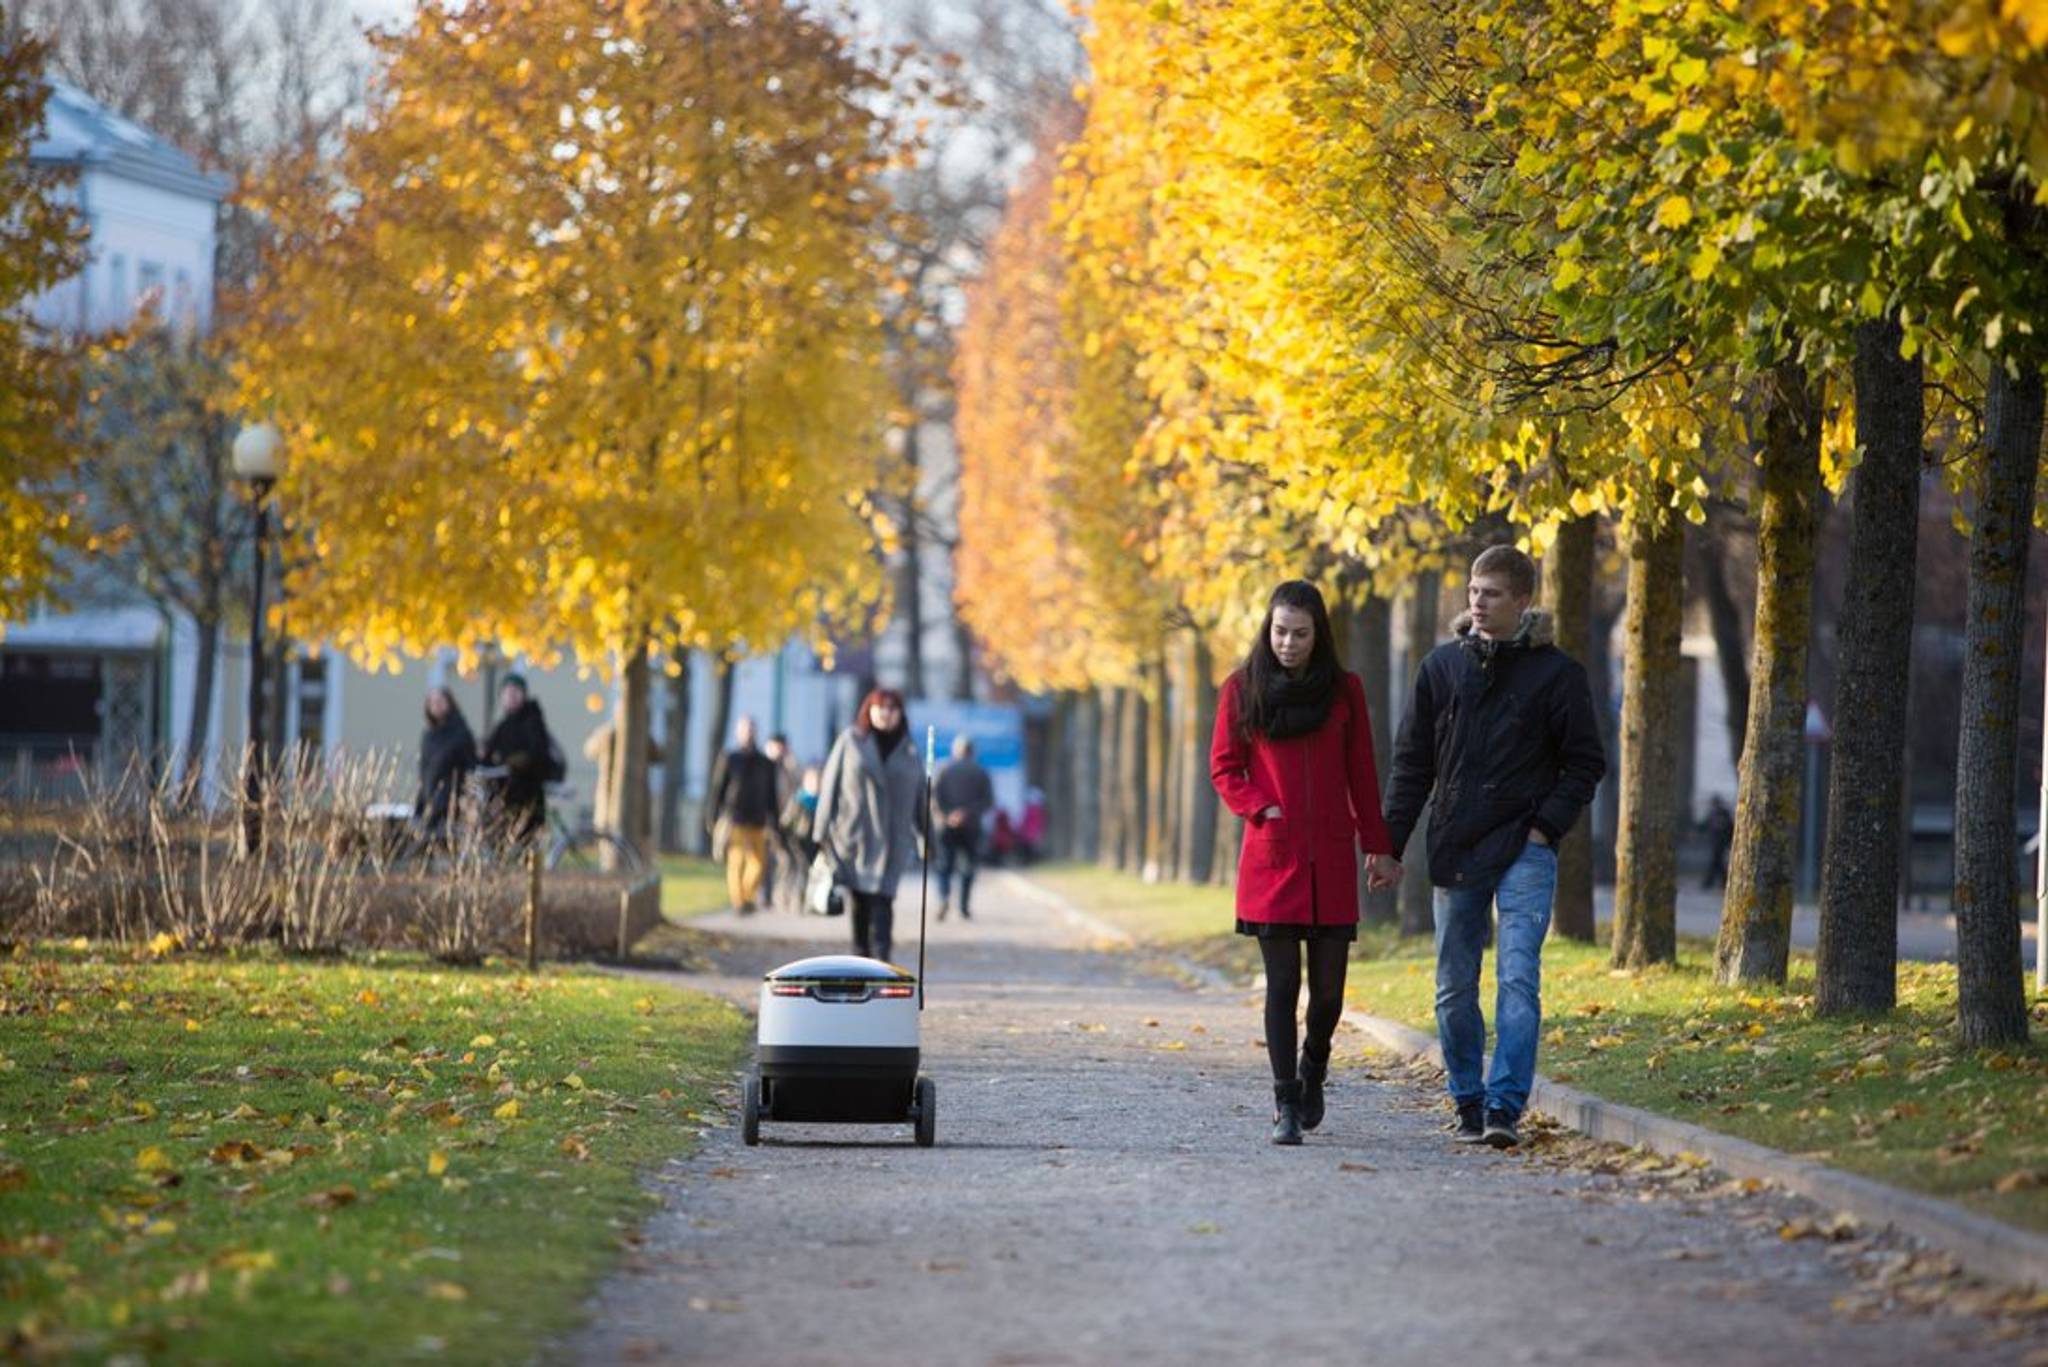 Starship brings delivery innovation to pavements